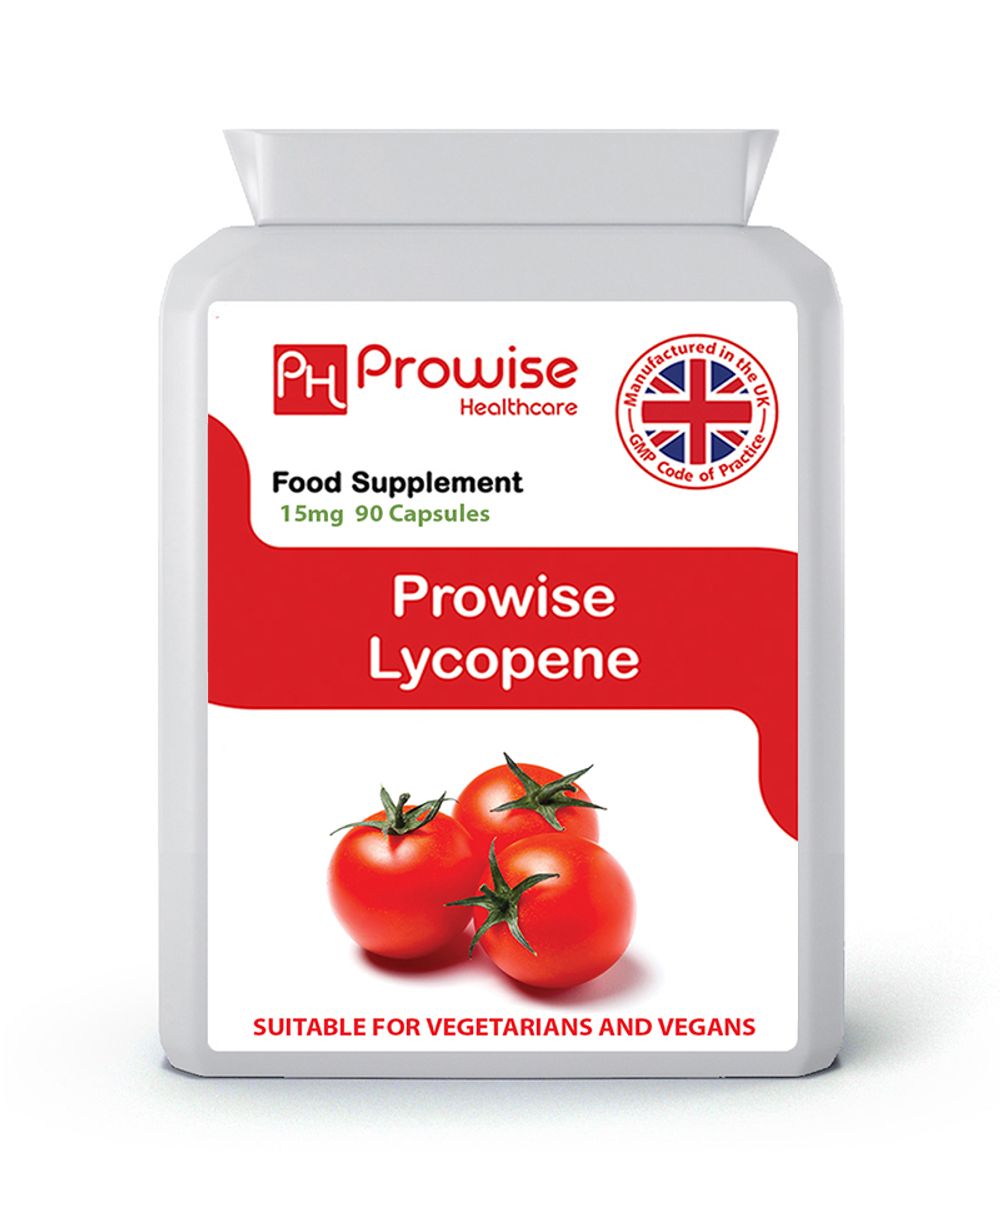 Lycopene 15mg 90 Capsules by Prowise Healthcare